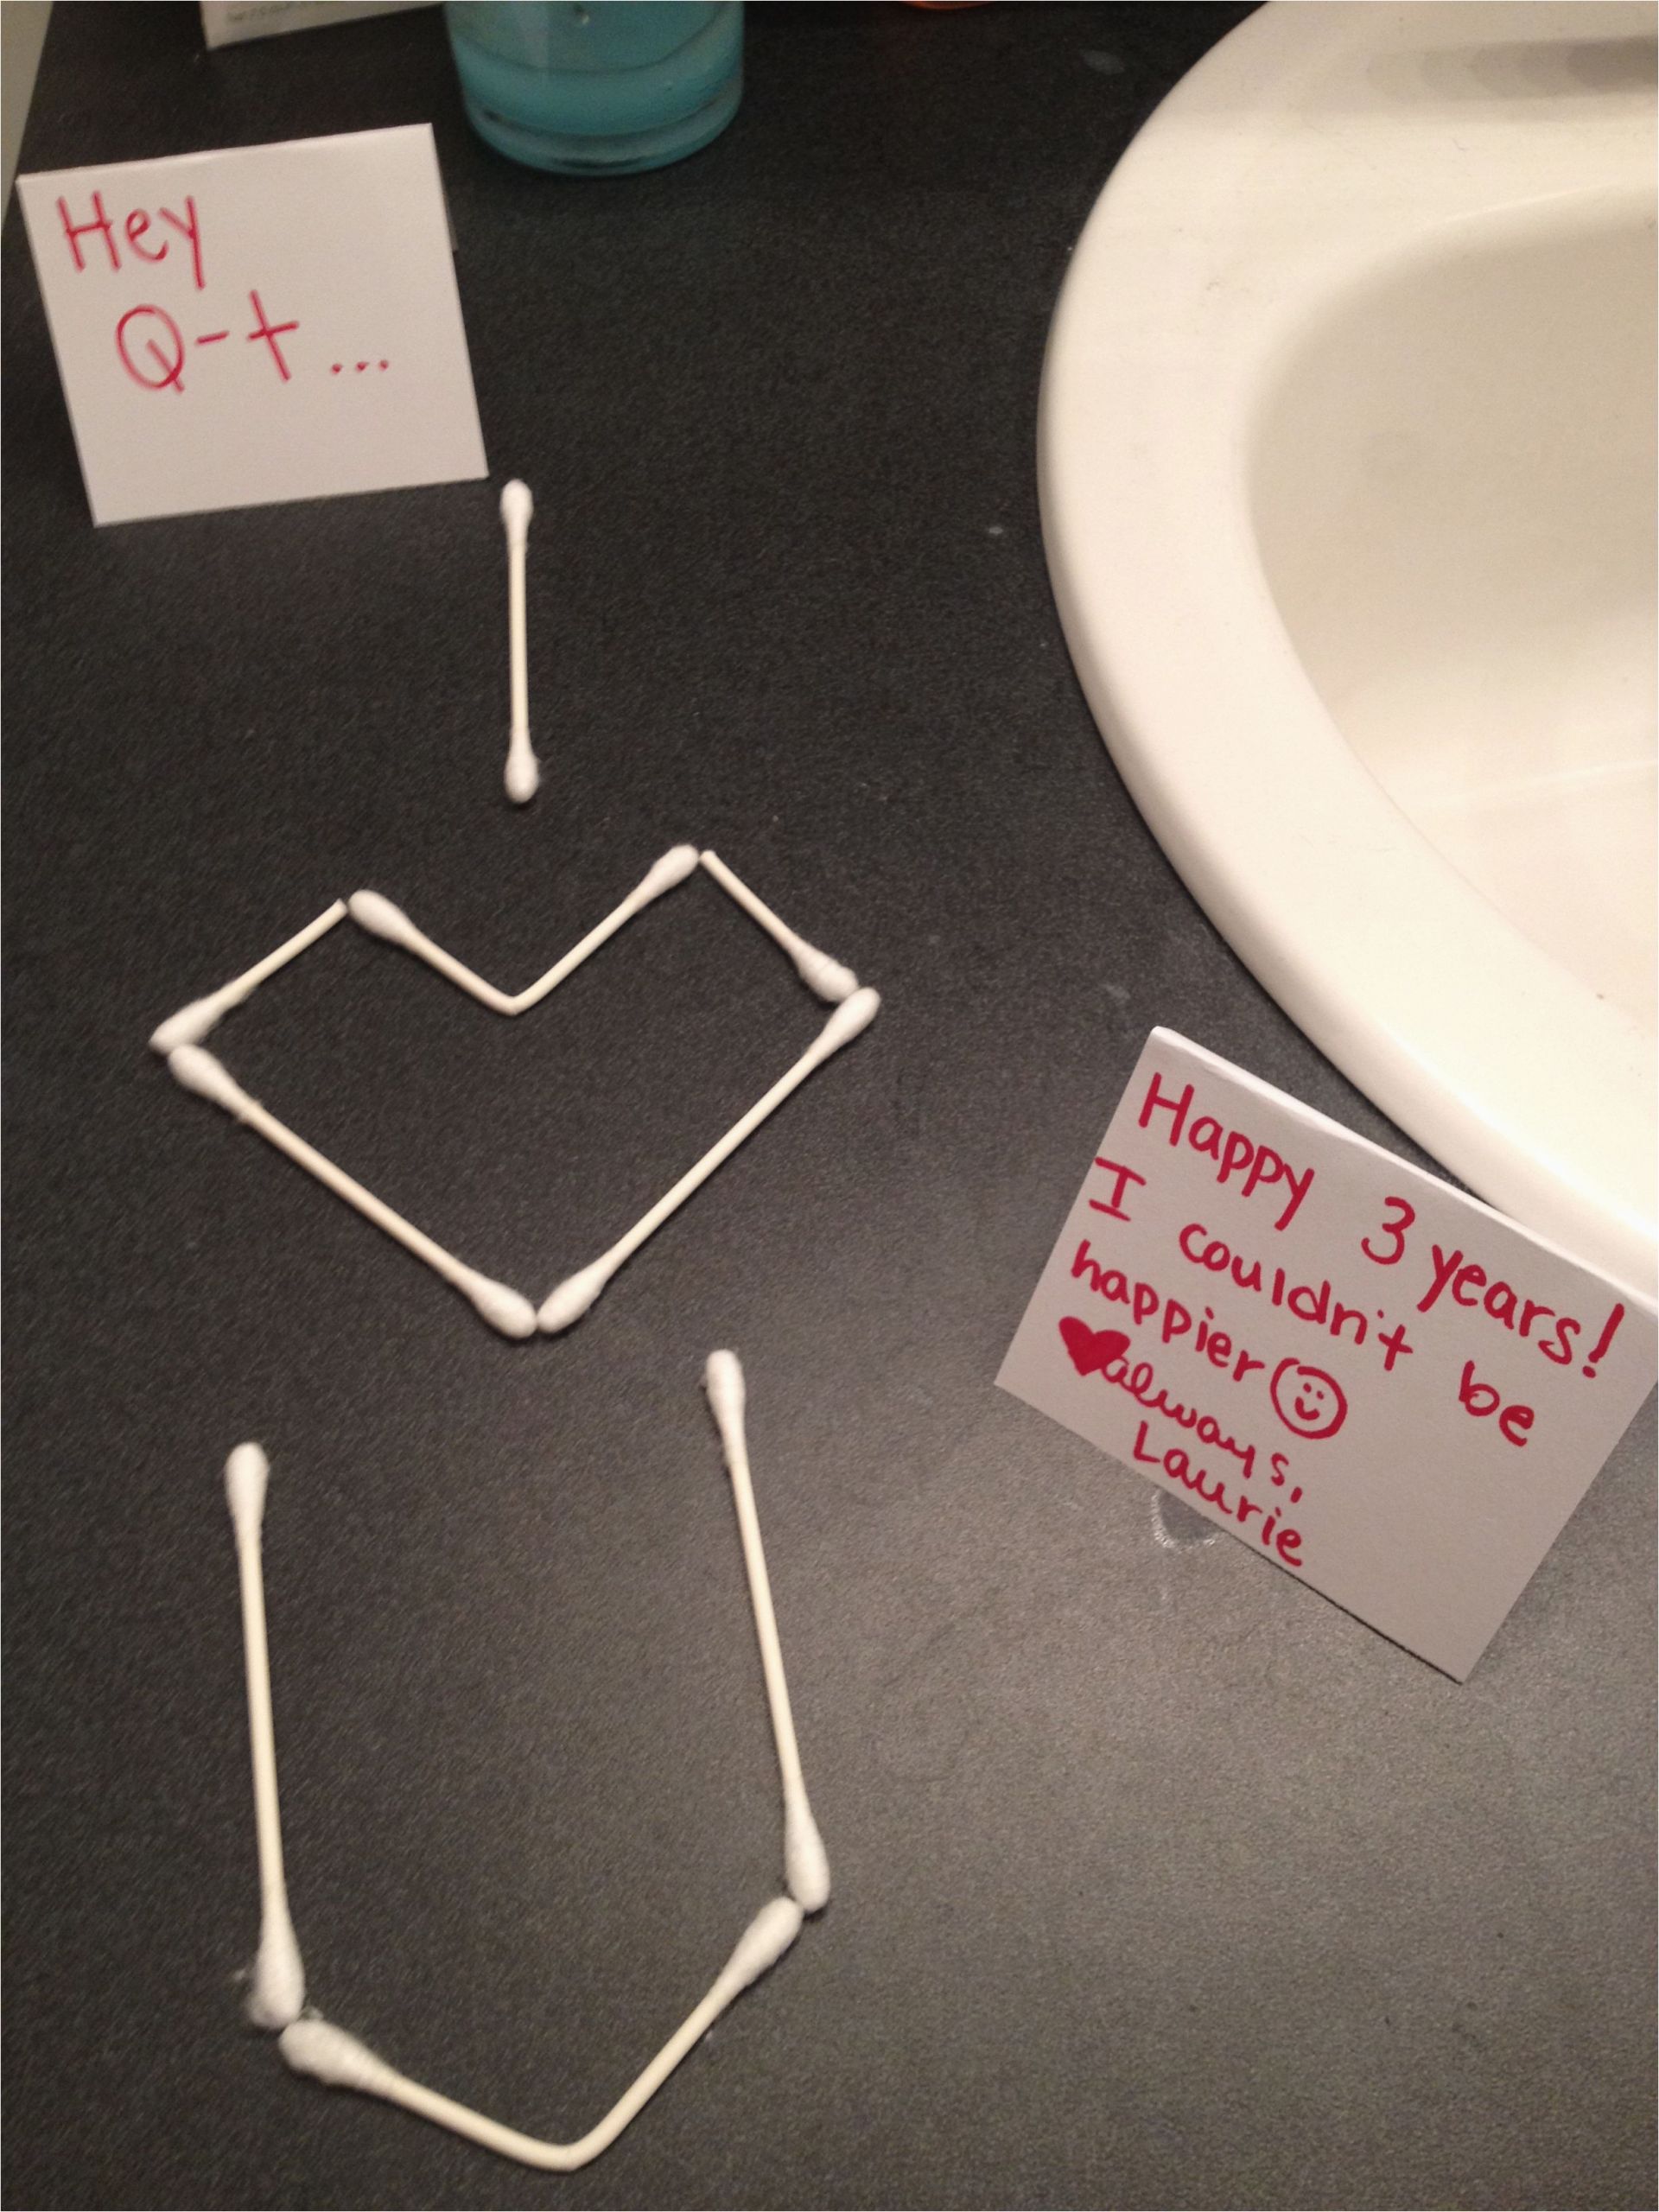 Sweet Birthday Gifts for Husband I Left This In the Bathroom the Night before Our